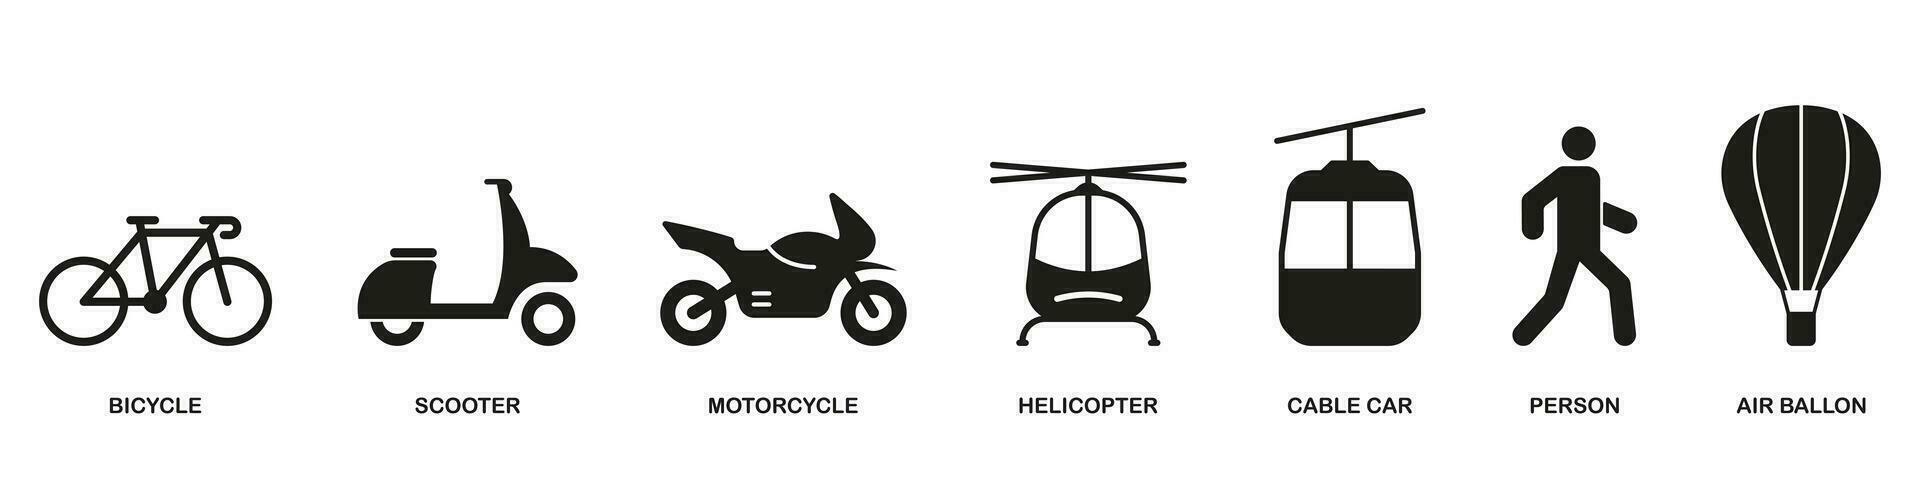 Transportation Silhouette Icon Set. Traffic Solid Sign. Motorcycle, Bike, Moped, Scooter, Cable Car, Helicopter Pictogram. Delivery Service Vehicle Symbol Collection. Isolated Vector Illustration.